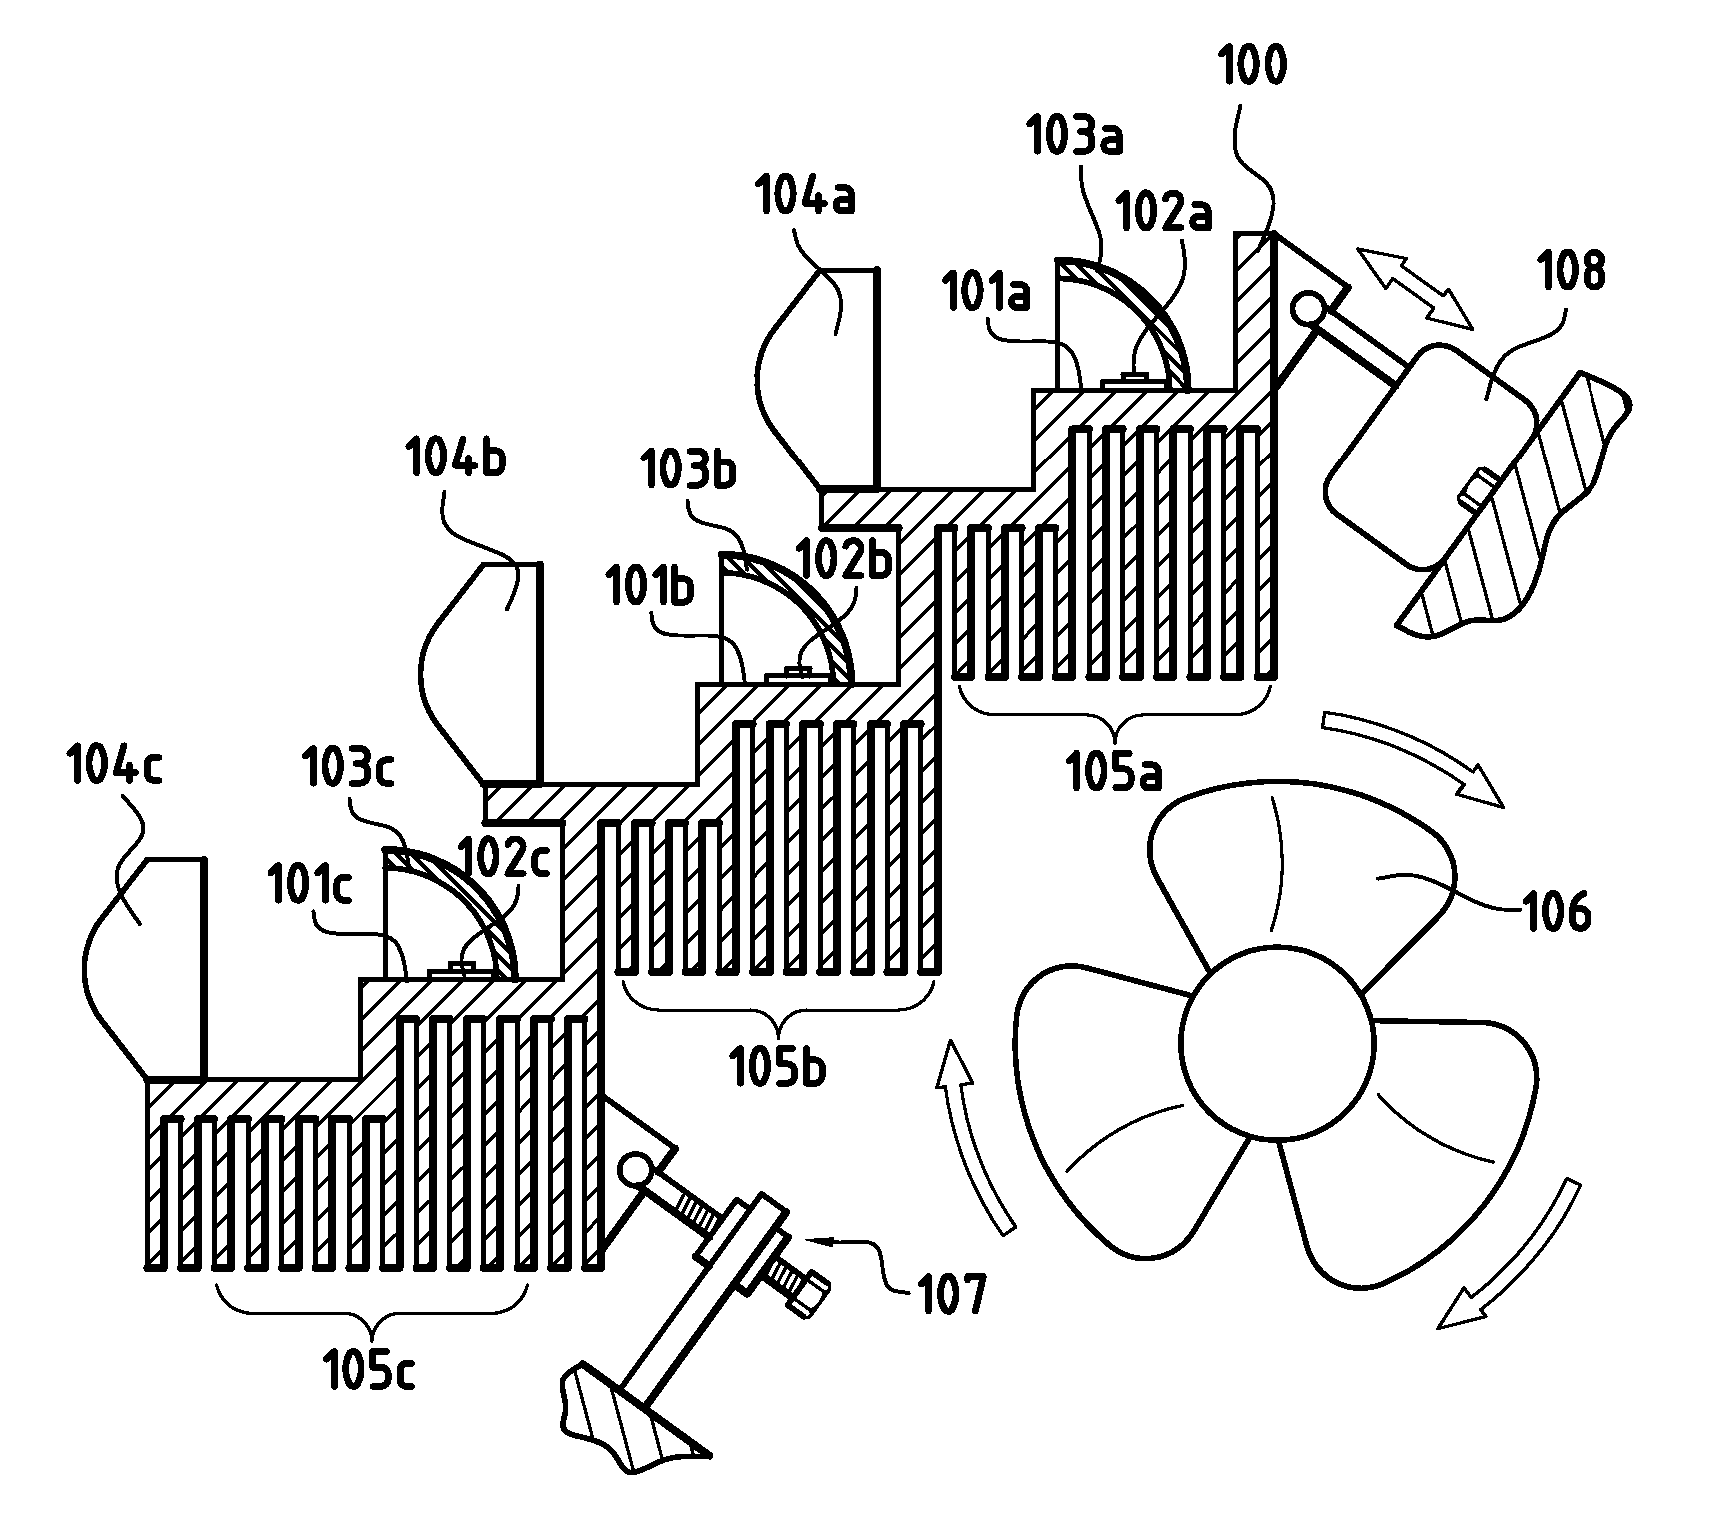 Lighting and/or signaling device for a motor vehicle incorporating a material having thermal anisotropy